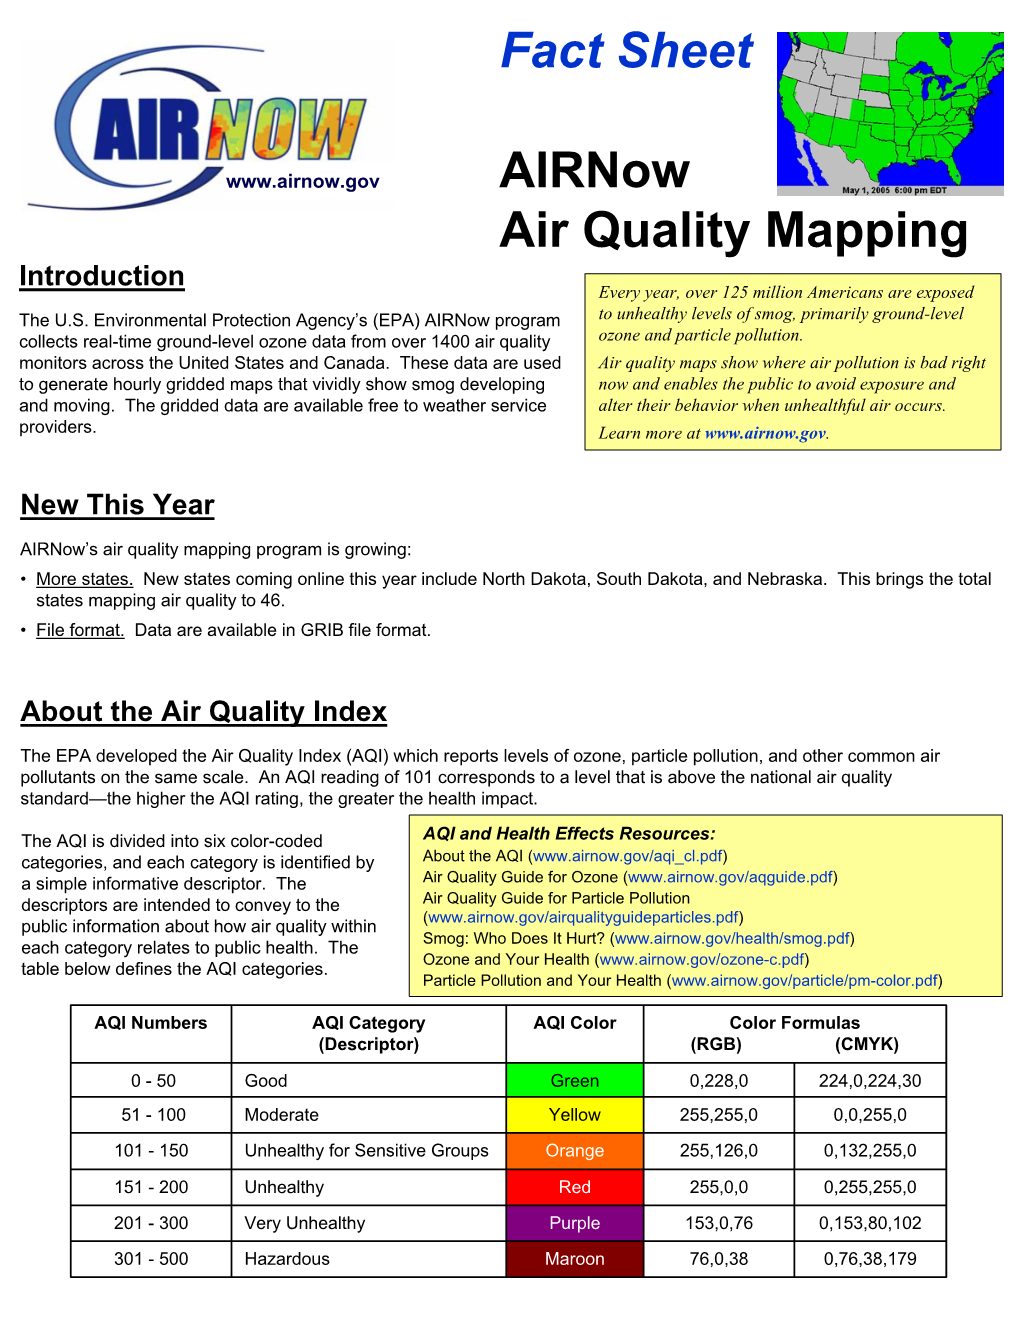 Fact Sheet Airnow Air Quality Mapping